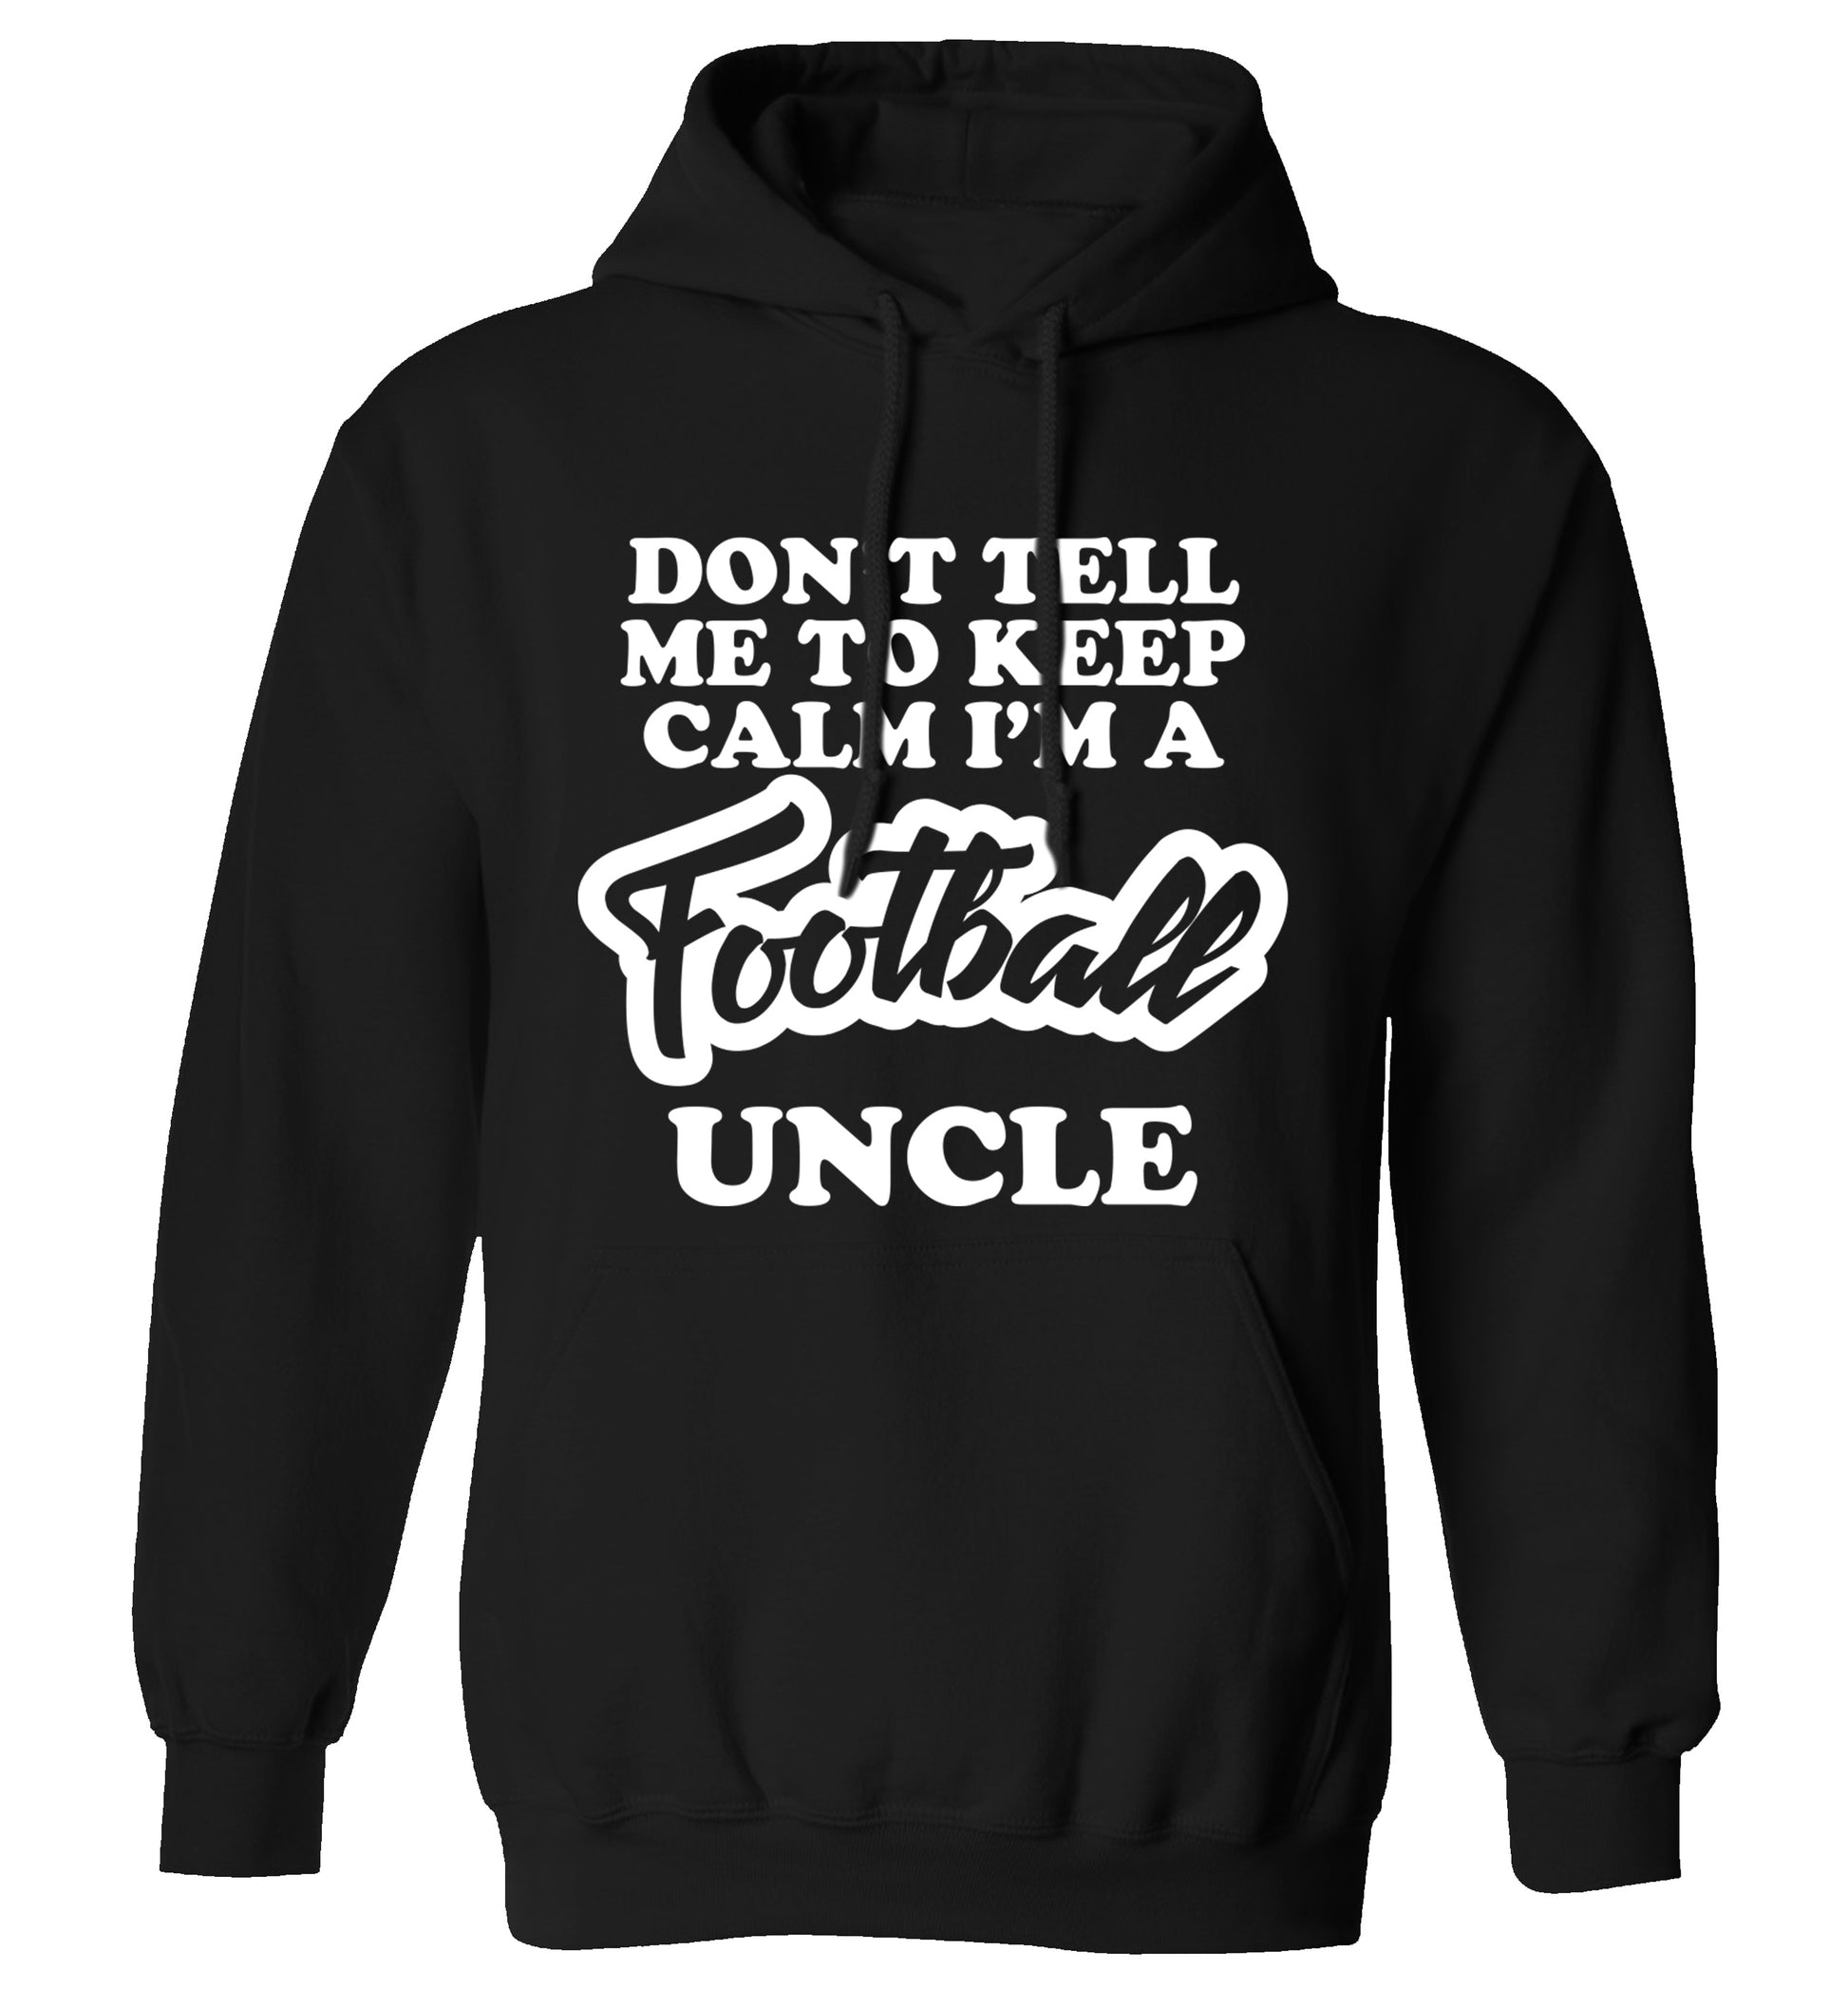 Worlds most amazing football uncle adults unisexblack hoodie 2XL